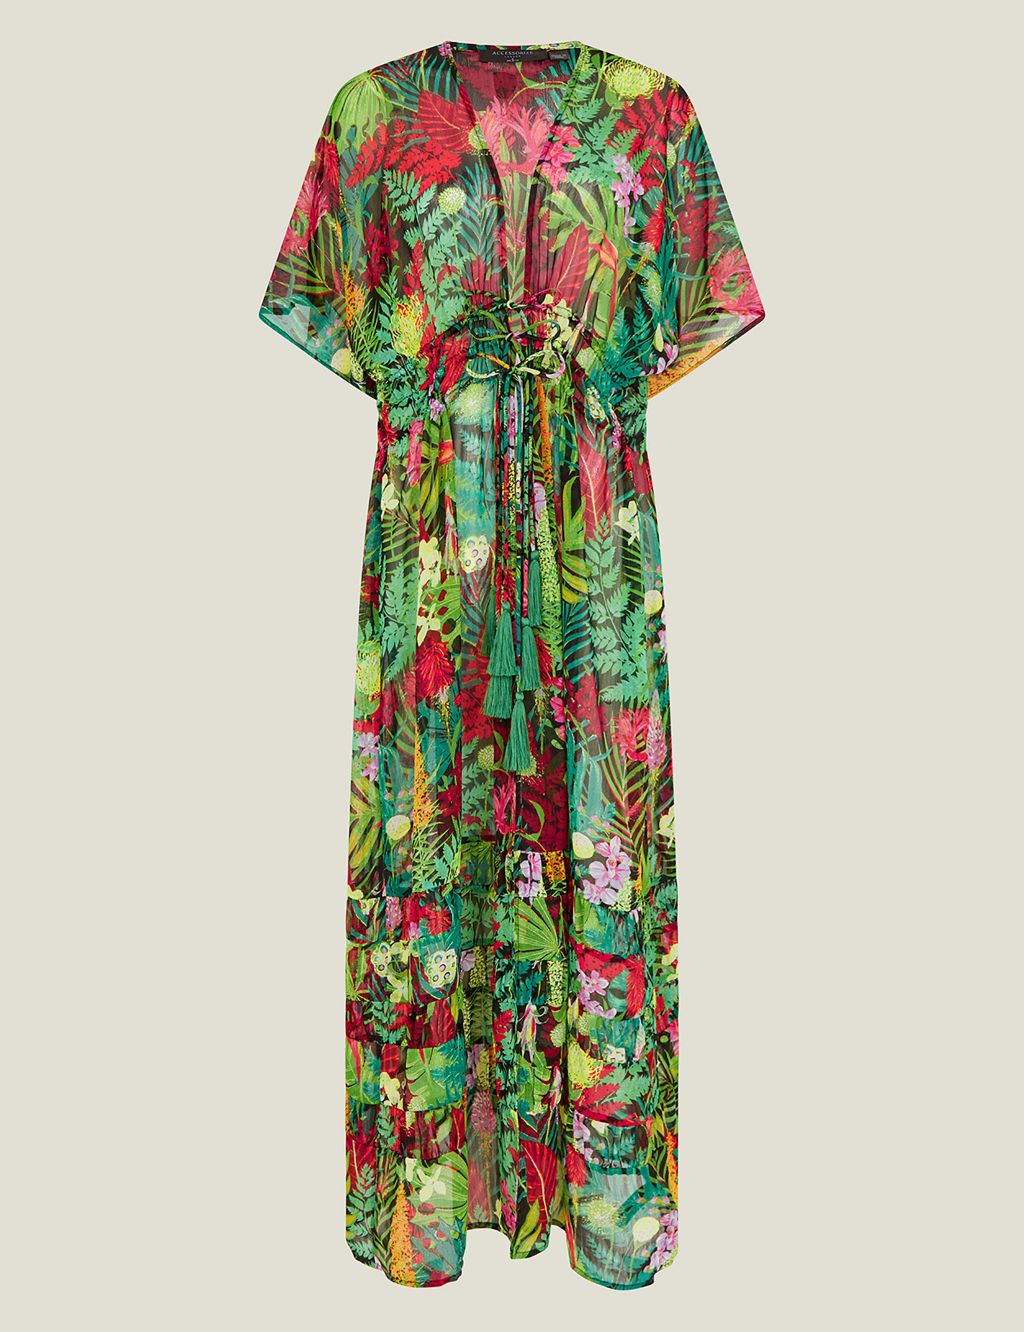 Printed Tie Front Beach Cover Up Kaftan 1 of 4